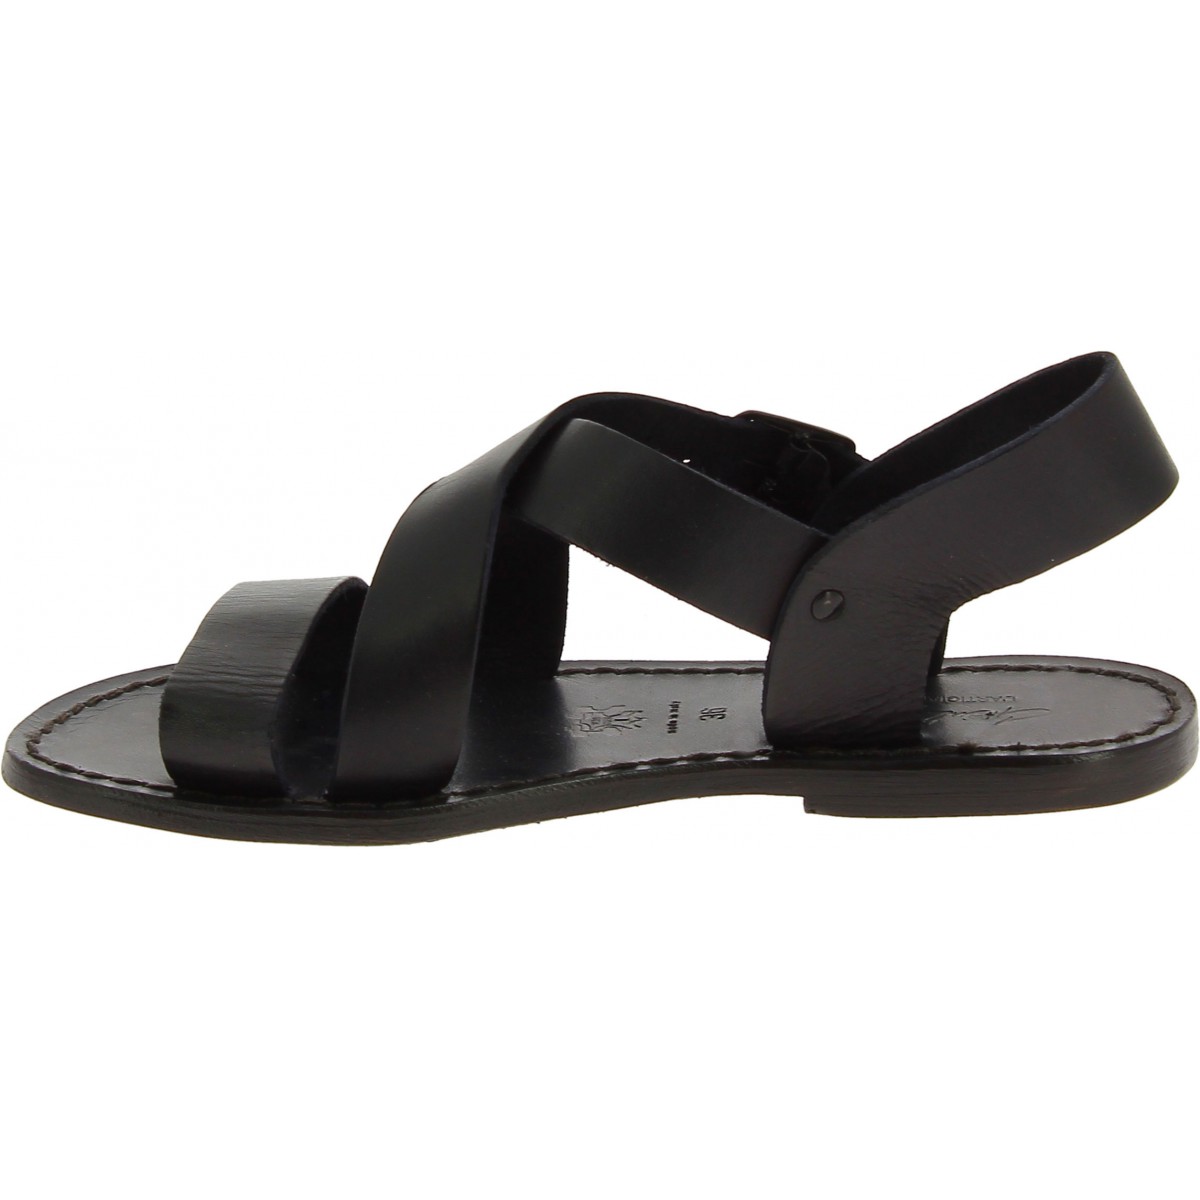 Black leather women's sandals handmade in Italy | The leather craftsmen